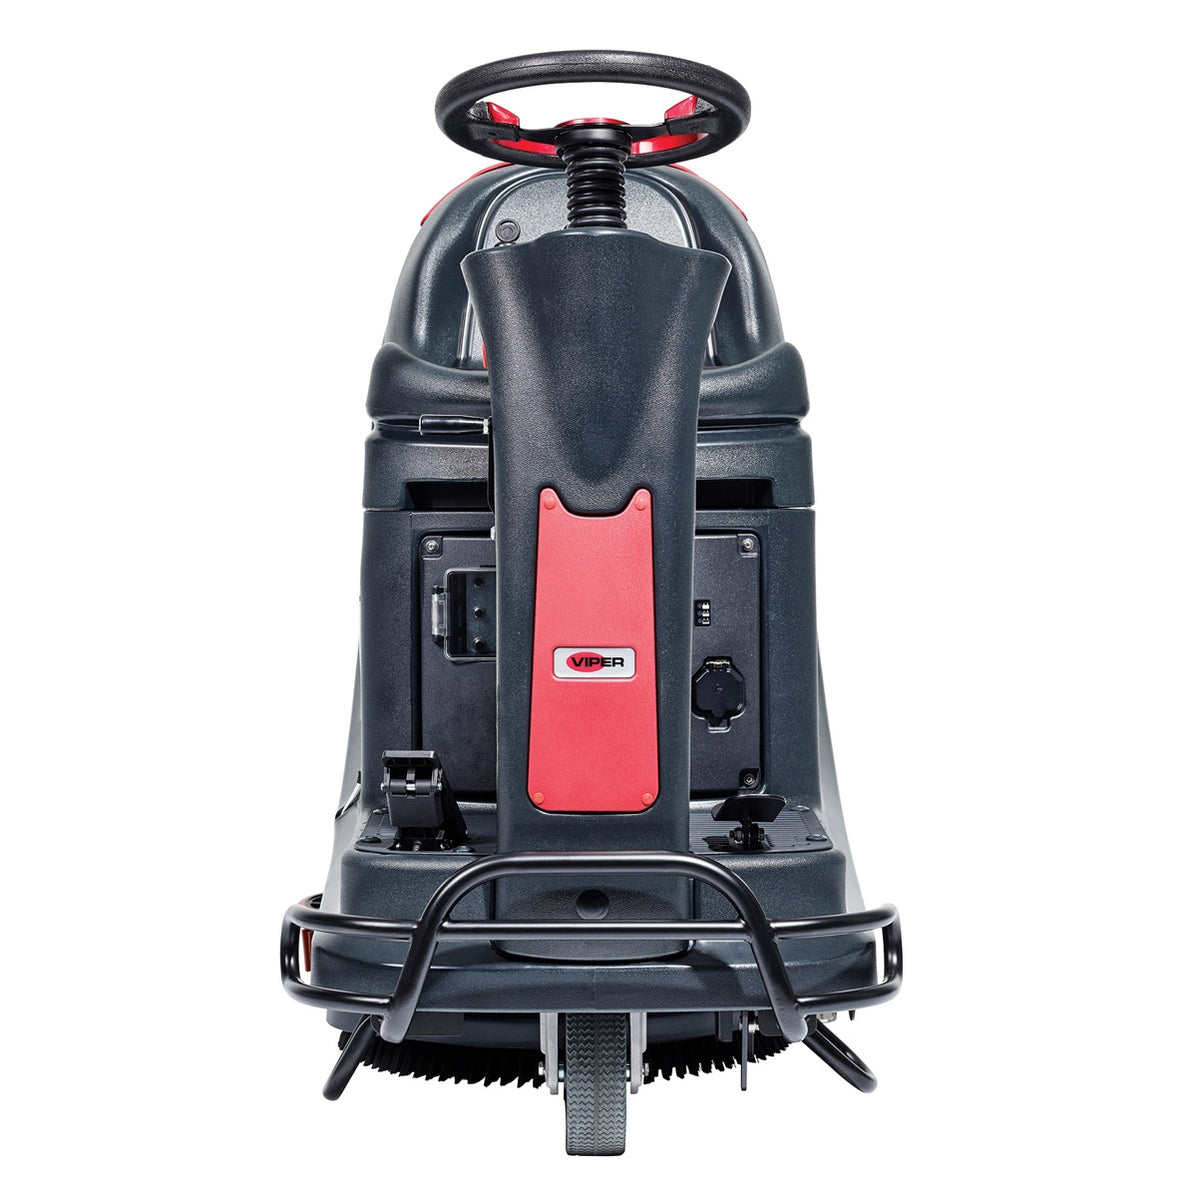 Viper 20 Rider Automatic Floor Scrubber W Traction Drive 19 Gallons